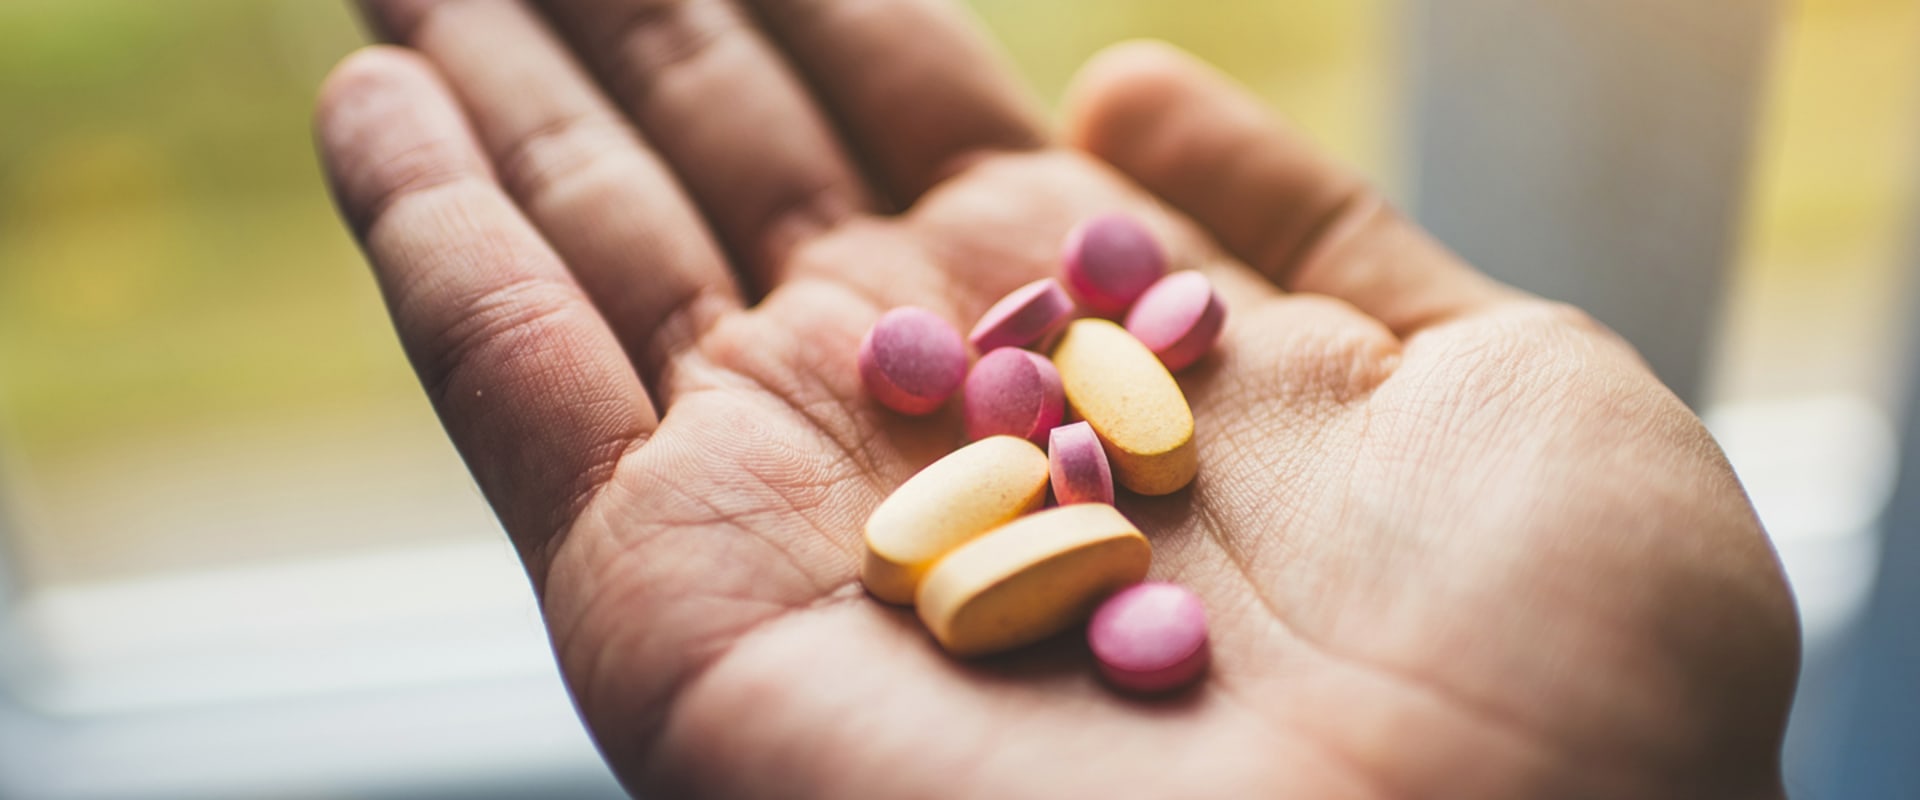 How often should you take a break from taking supplements?